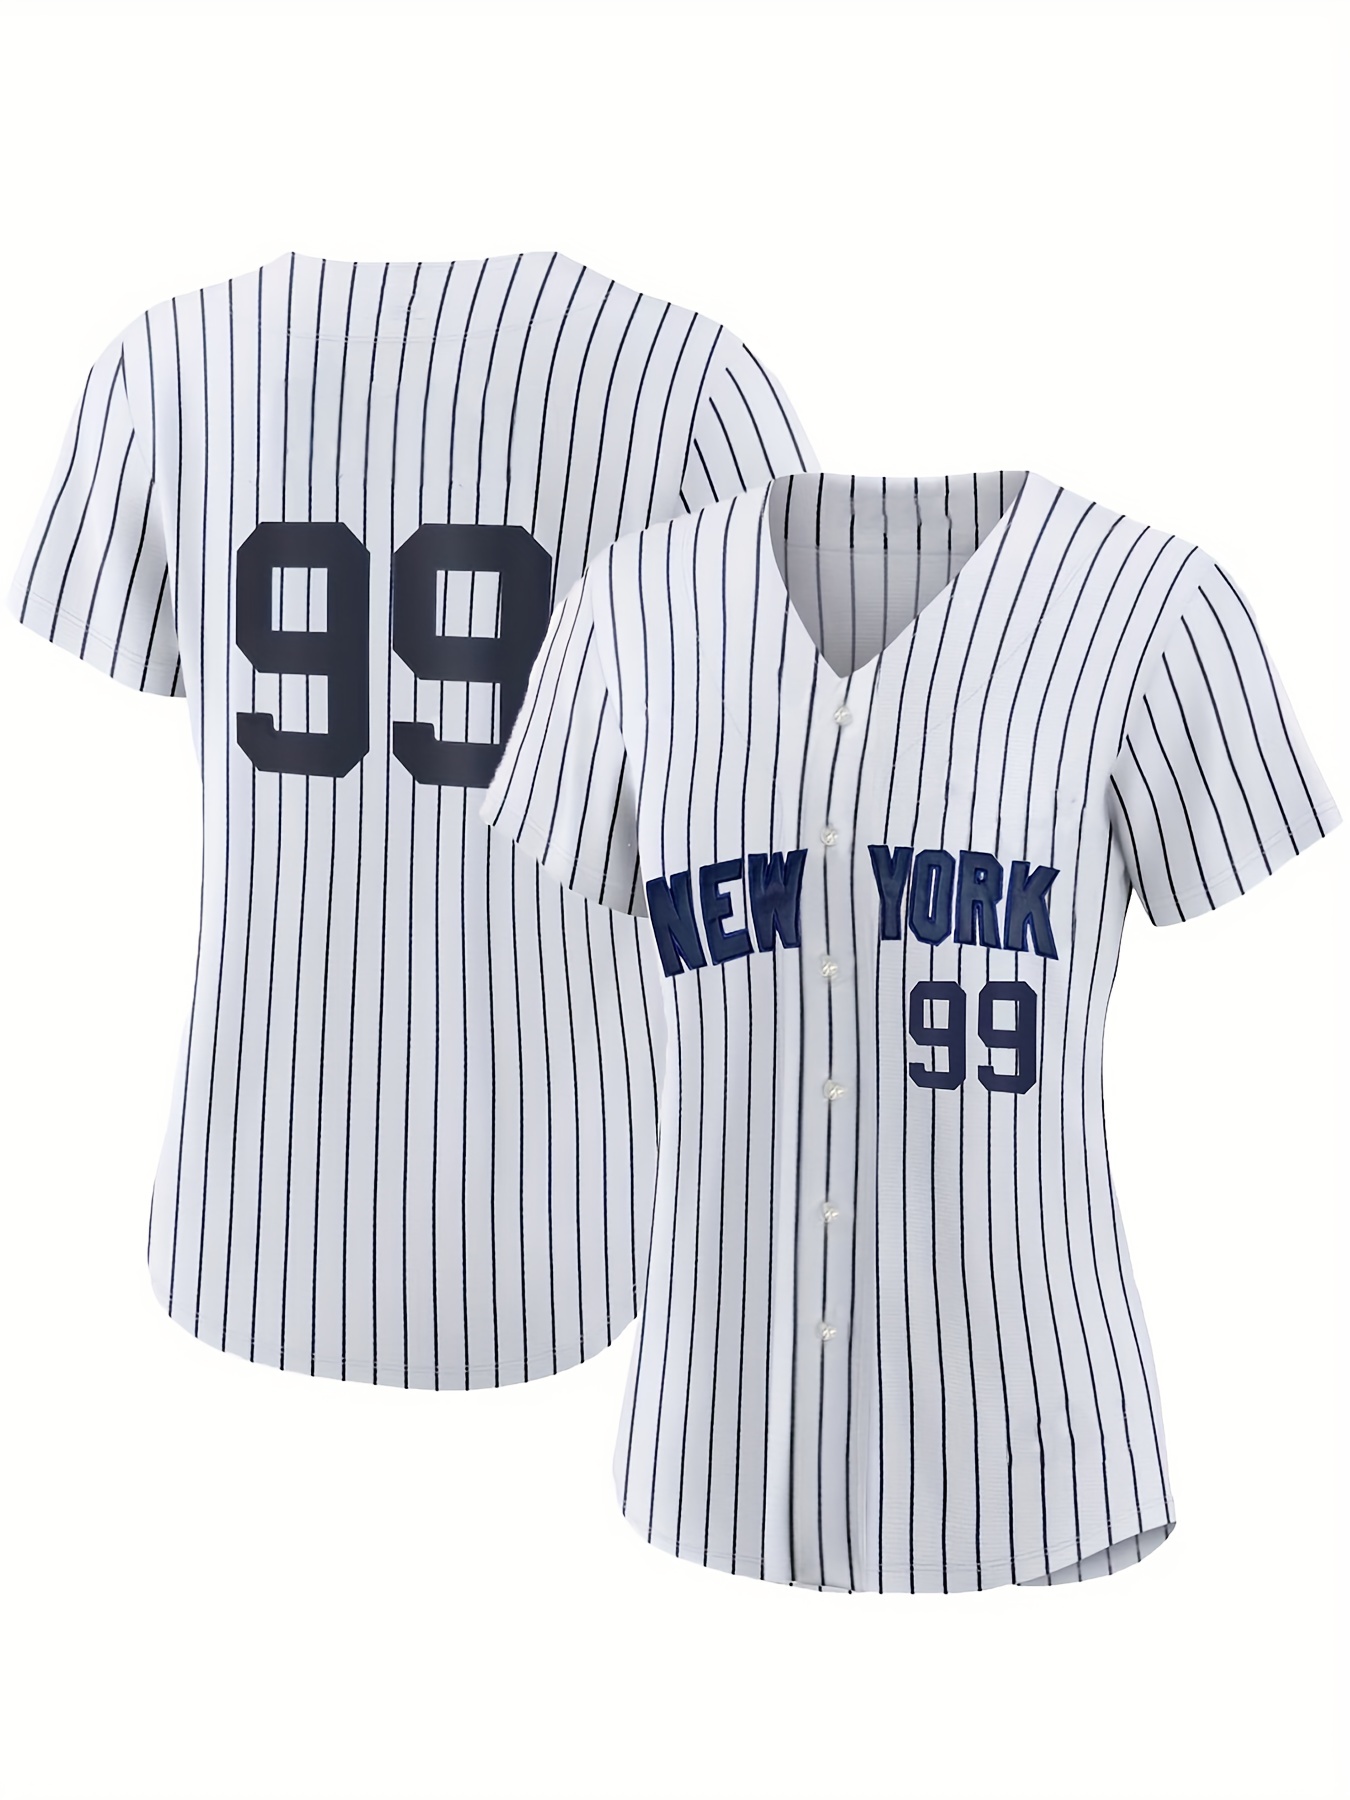 Temu Women's Baseball Jersey New York Letter Print V-Neck Short Sleeve Sports T-Shirt, Blouses, Tee, Hip Hop Street Top for Casual Daily Party, Women